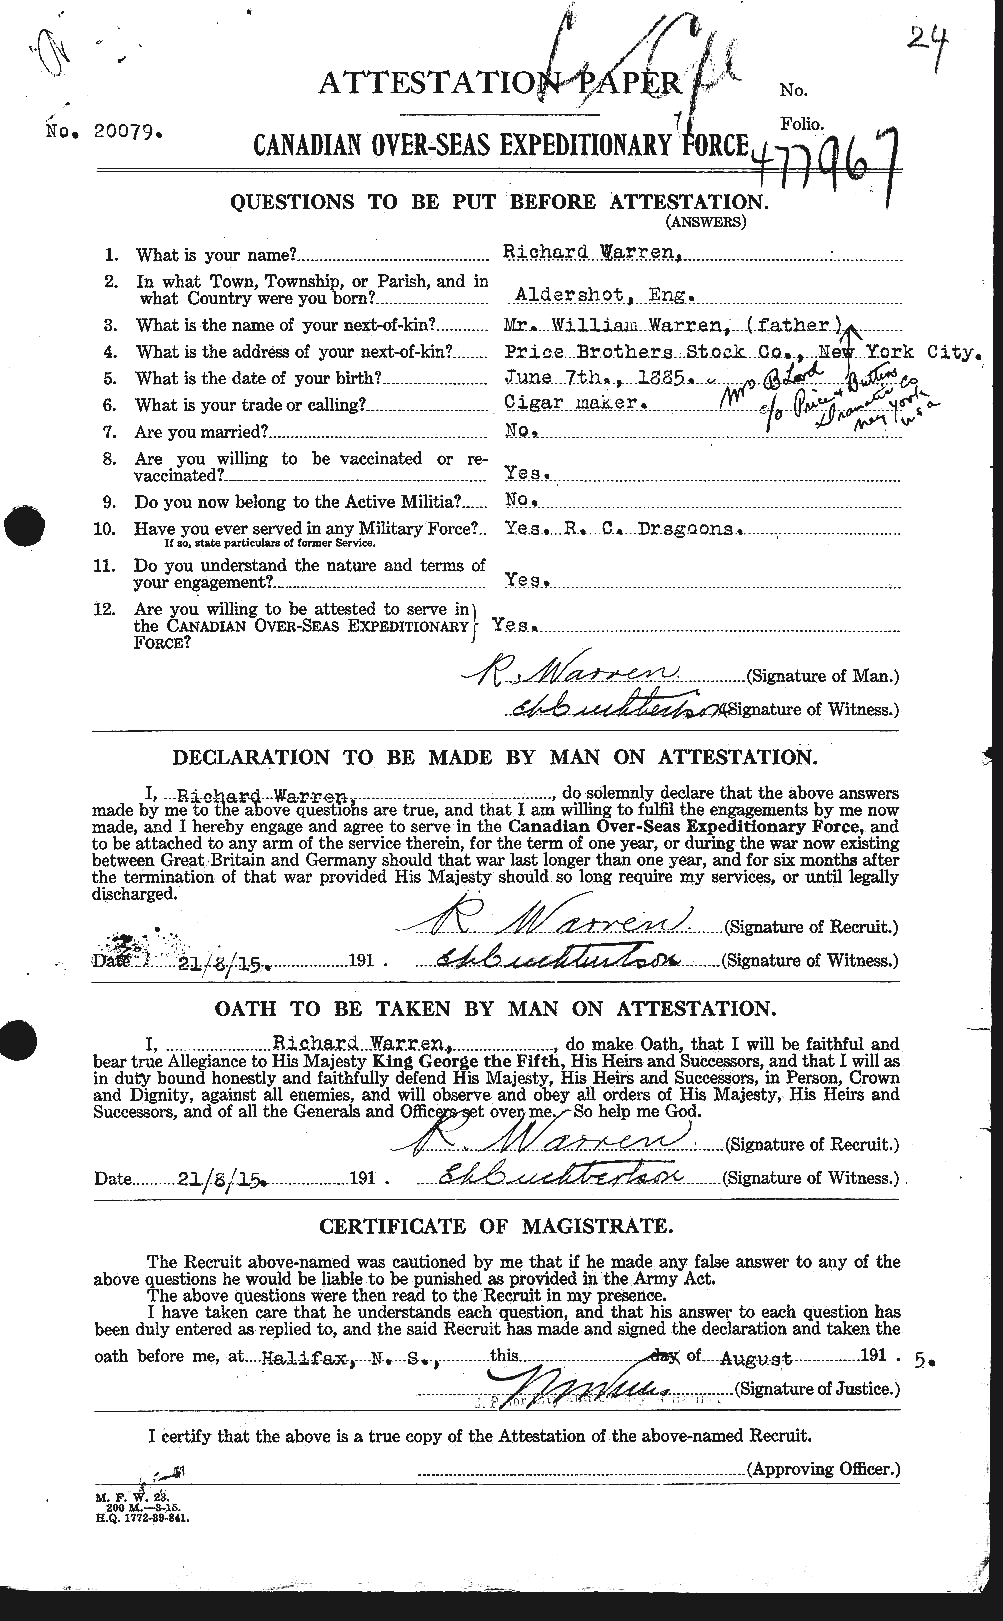 Personnel Records of the First World War - CEF 658619a